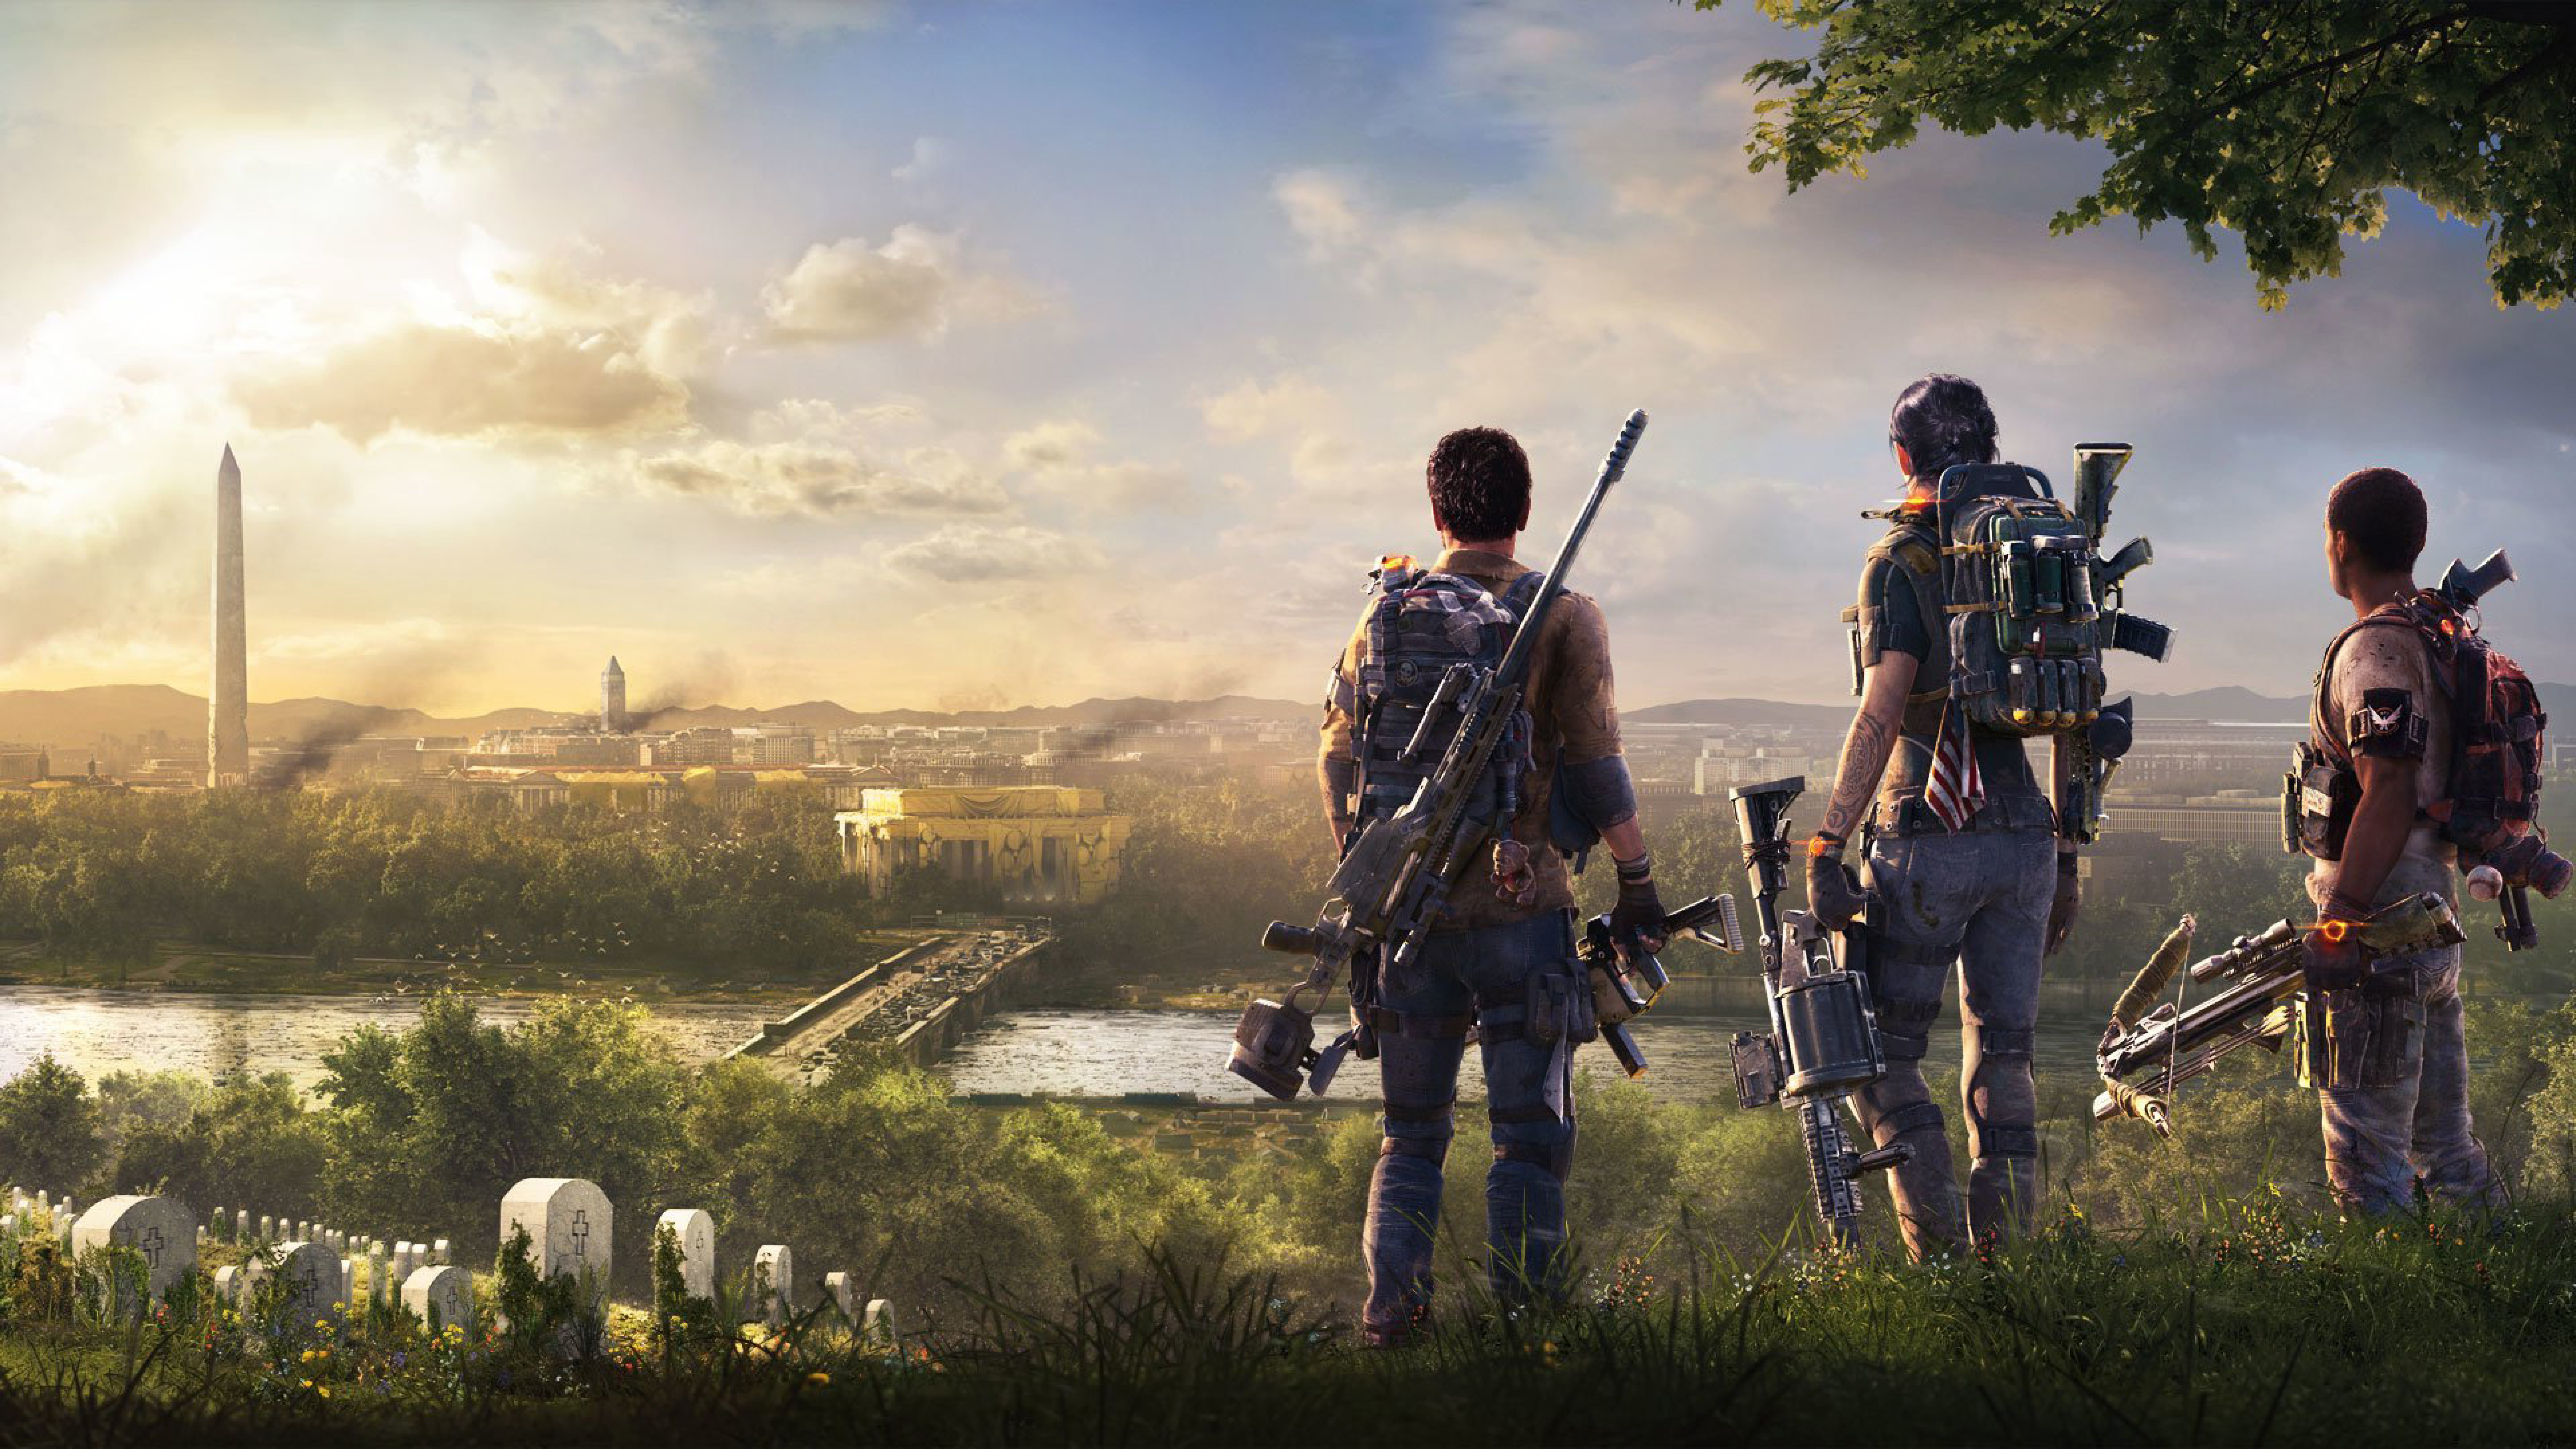 51x 19 The Division 2 Game 5k Wallpaper Hd Games 4k Wallpapers Images Photos And Background Wallpapers Den